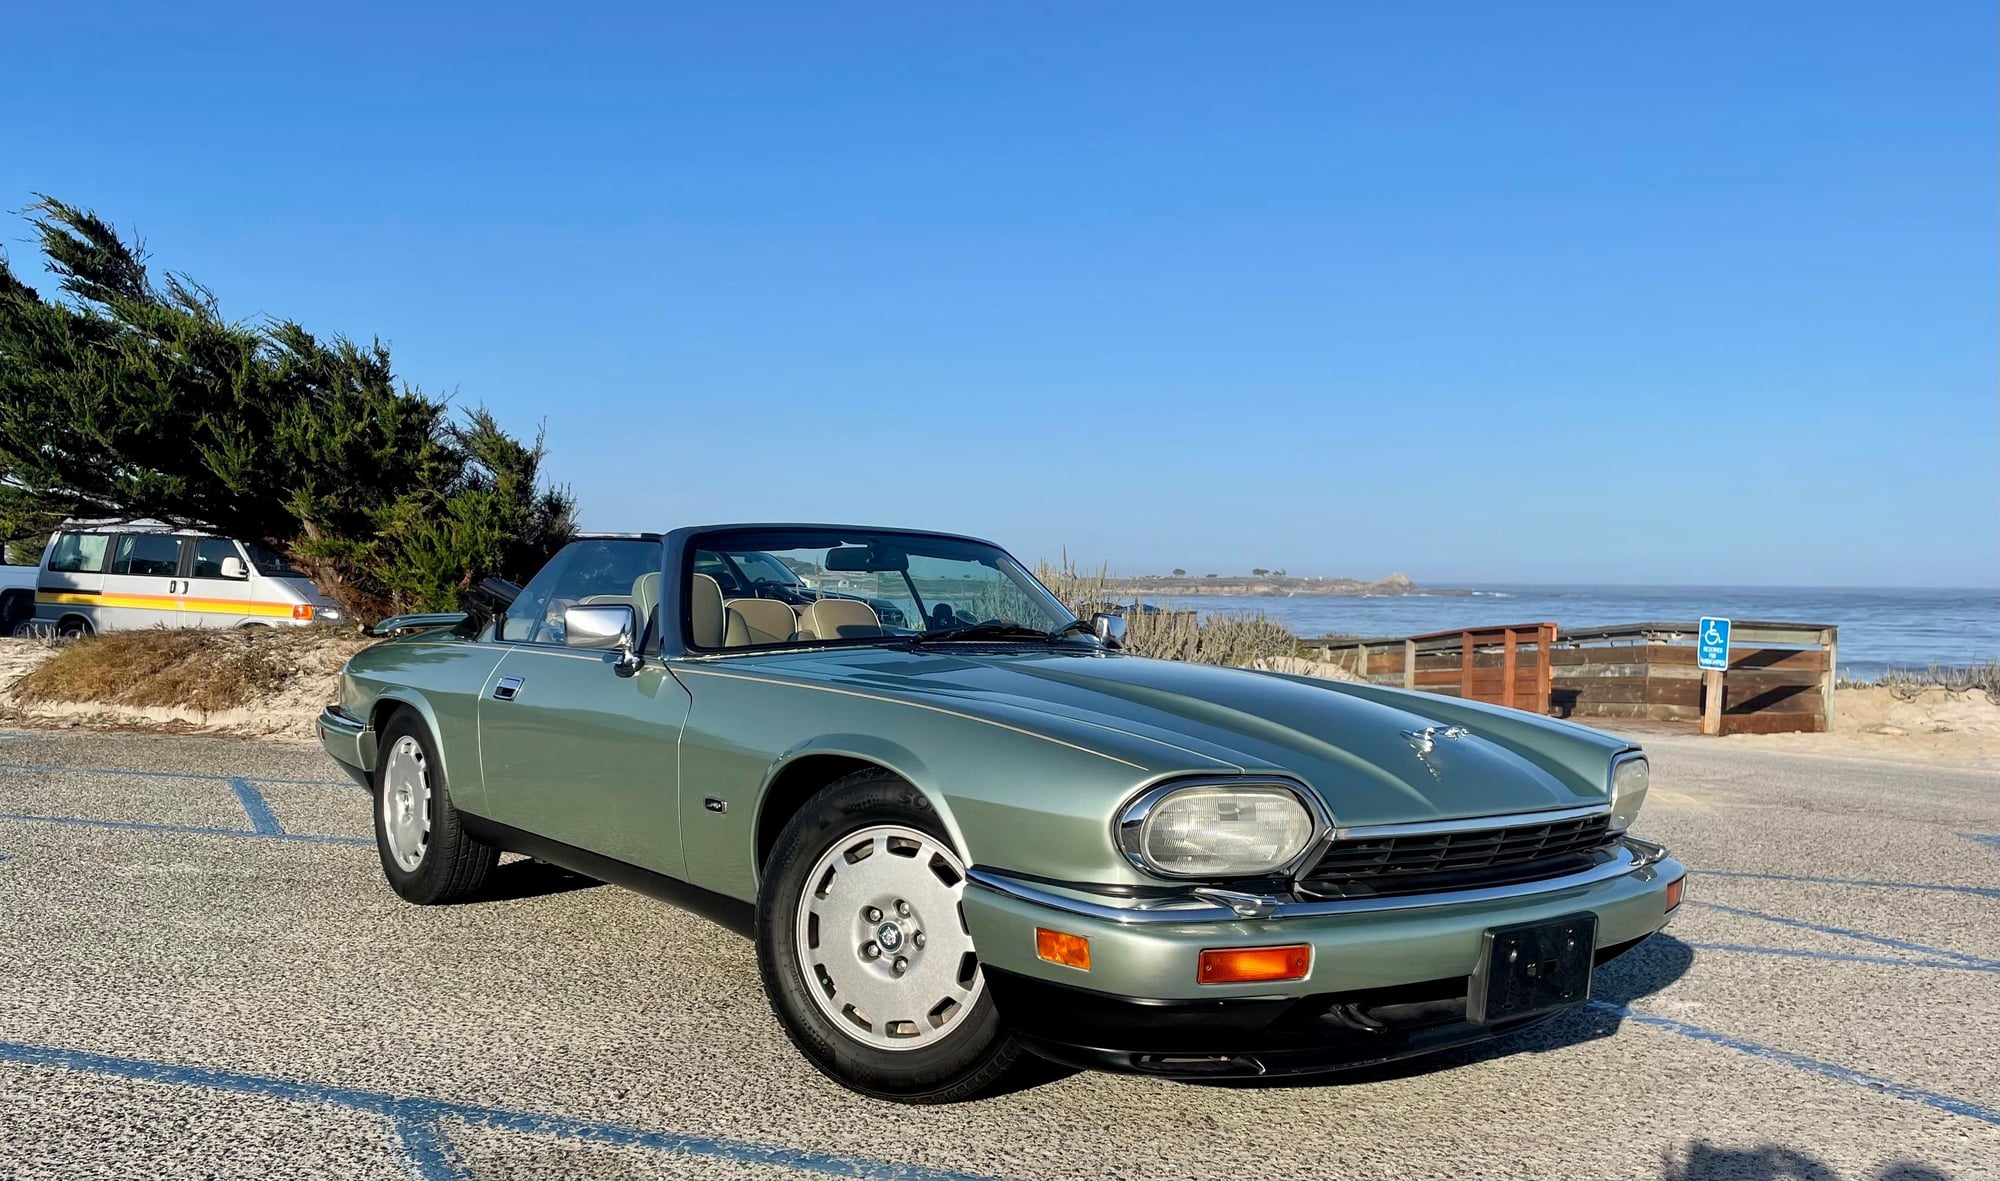 1996 Jaguar XJS - 1996 XJS - Used - VIN SAJNX2748TC223865 - 6 cyl - 2WD - Automatic - Convertible - Other - Pacific Grove, CA 93950, United States